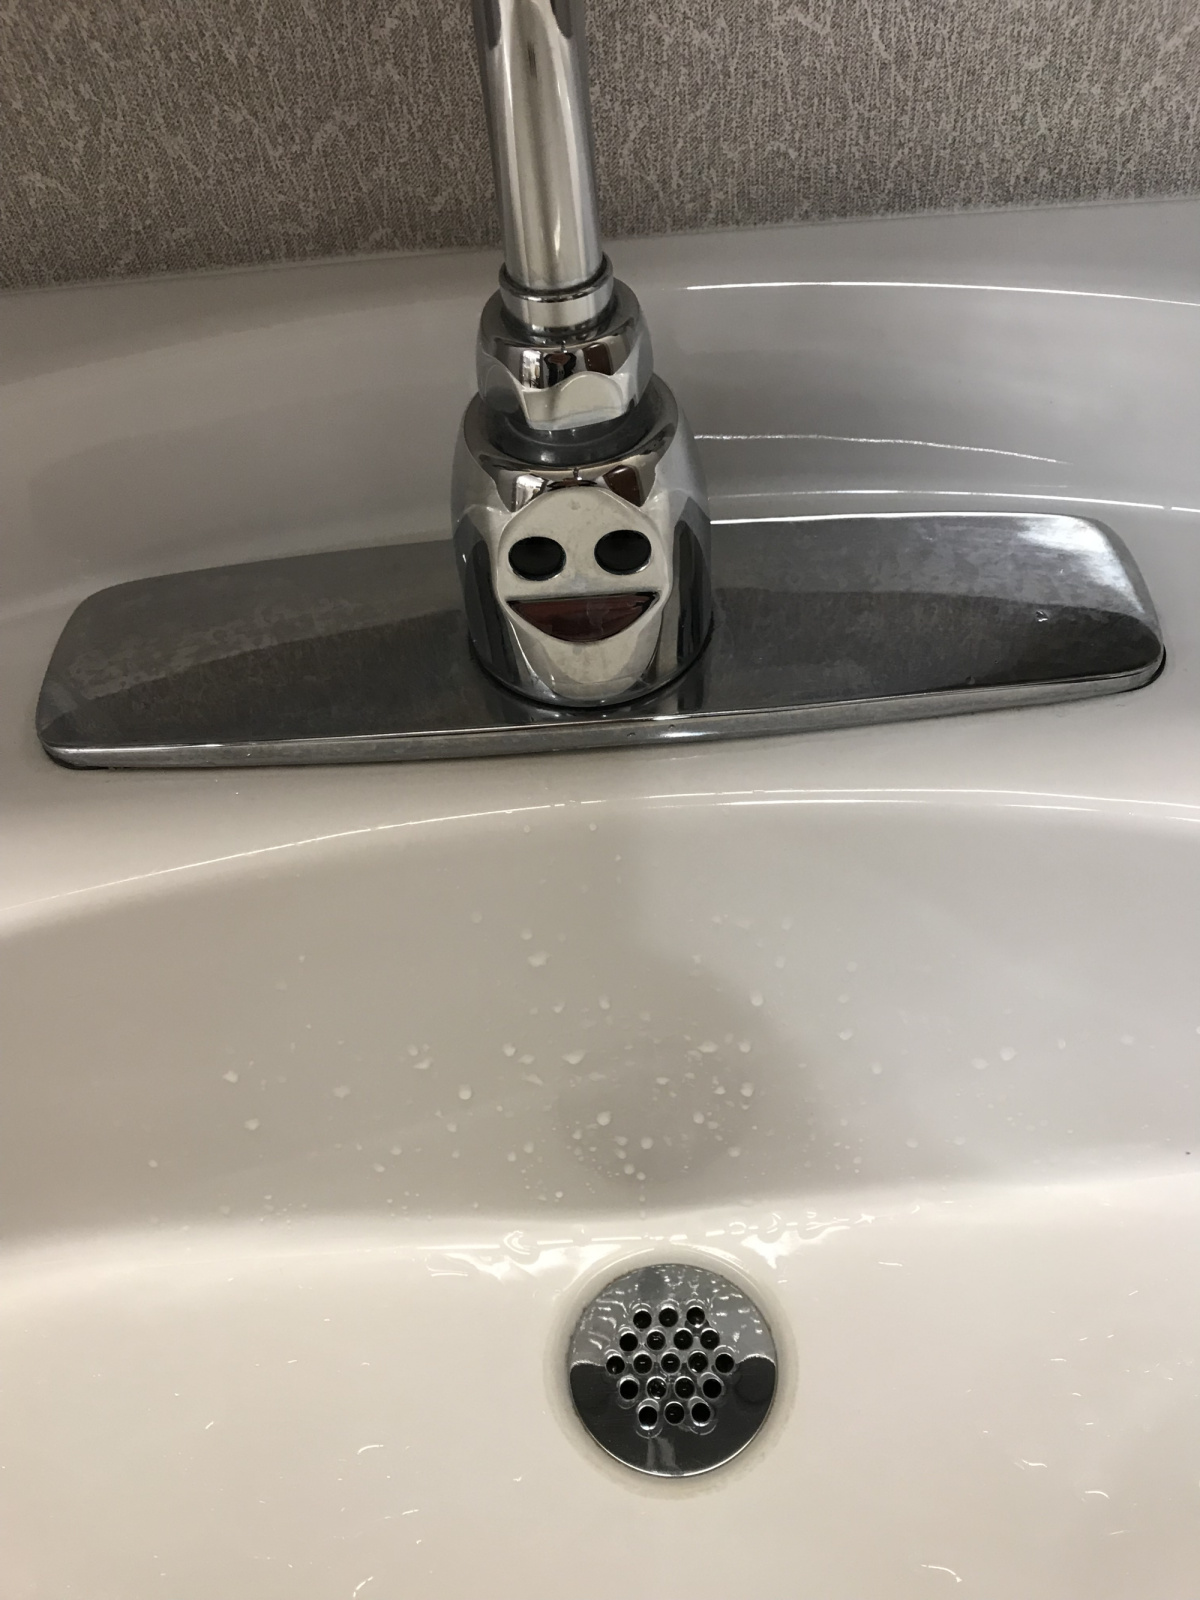 The sink and I were very happy on the day of my one-year, “no evidence of disease” follow-up visit!